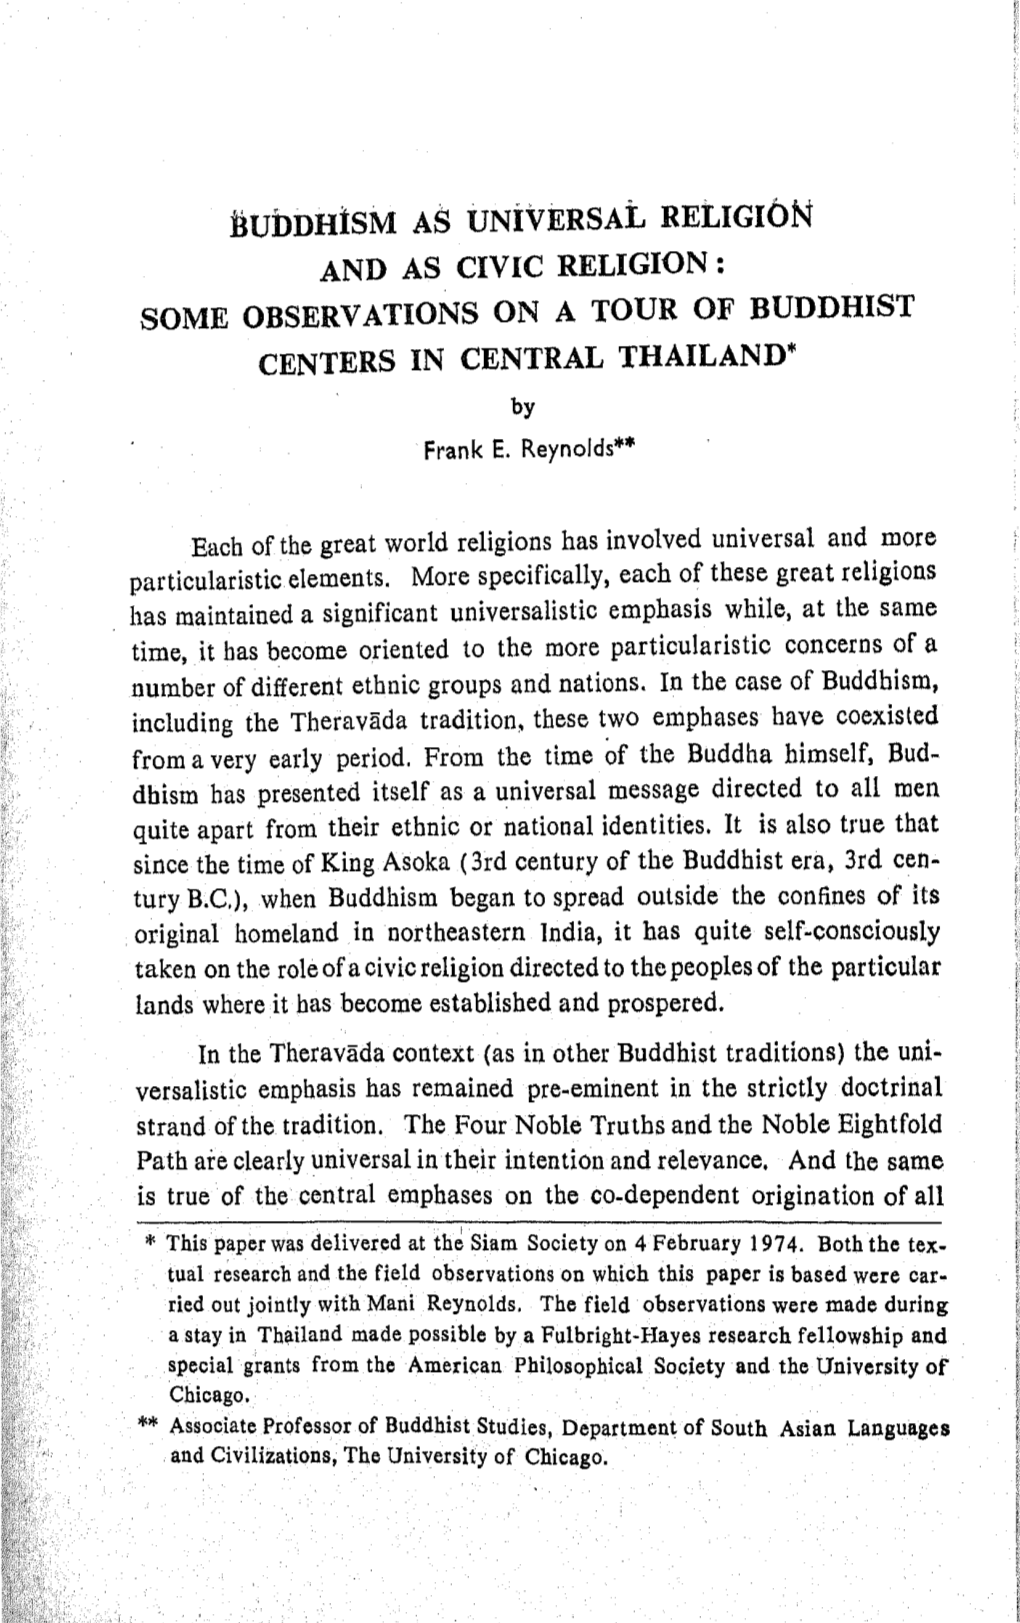 Bubdhism AS UNIVERSAL Religibn and AS CIVIC RELIGION : SOME OBSERVATIONS on a TOUR of BUDDHIST CENTERS in CENTRAL THAILAND"' by Frank E